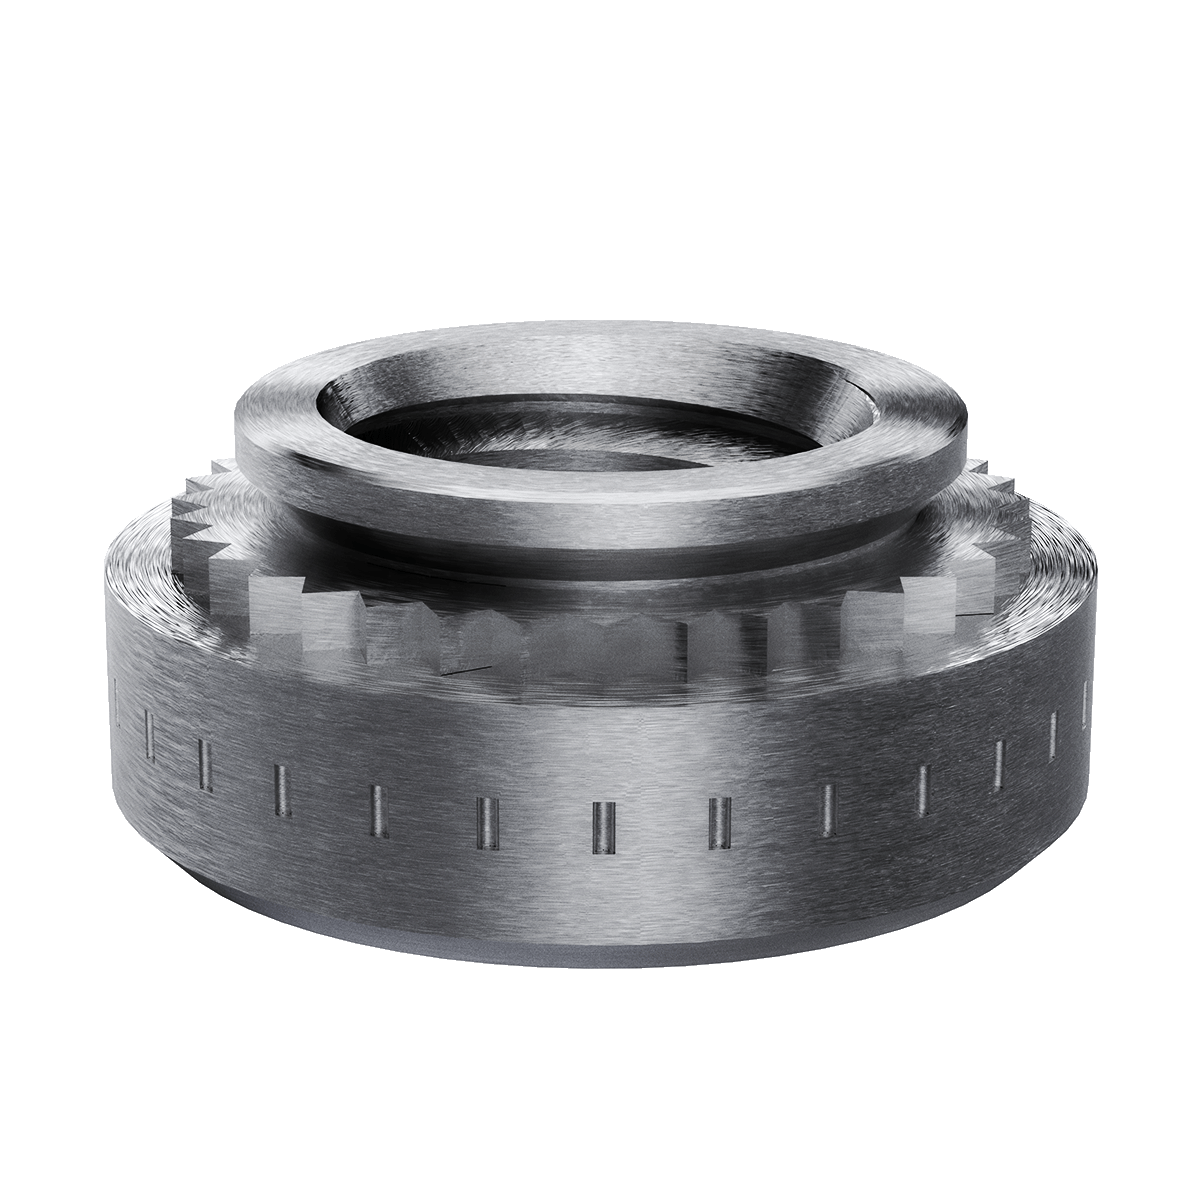 Self-Clinching Nut, For SS, 17-4 Stainless Steel, Passivated, 4-40 x 2, 100 Pack